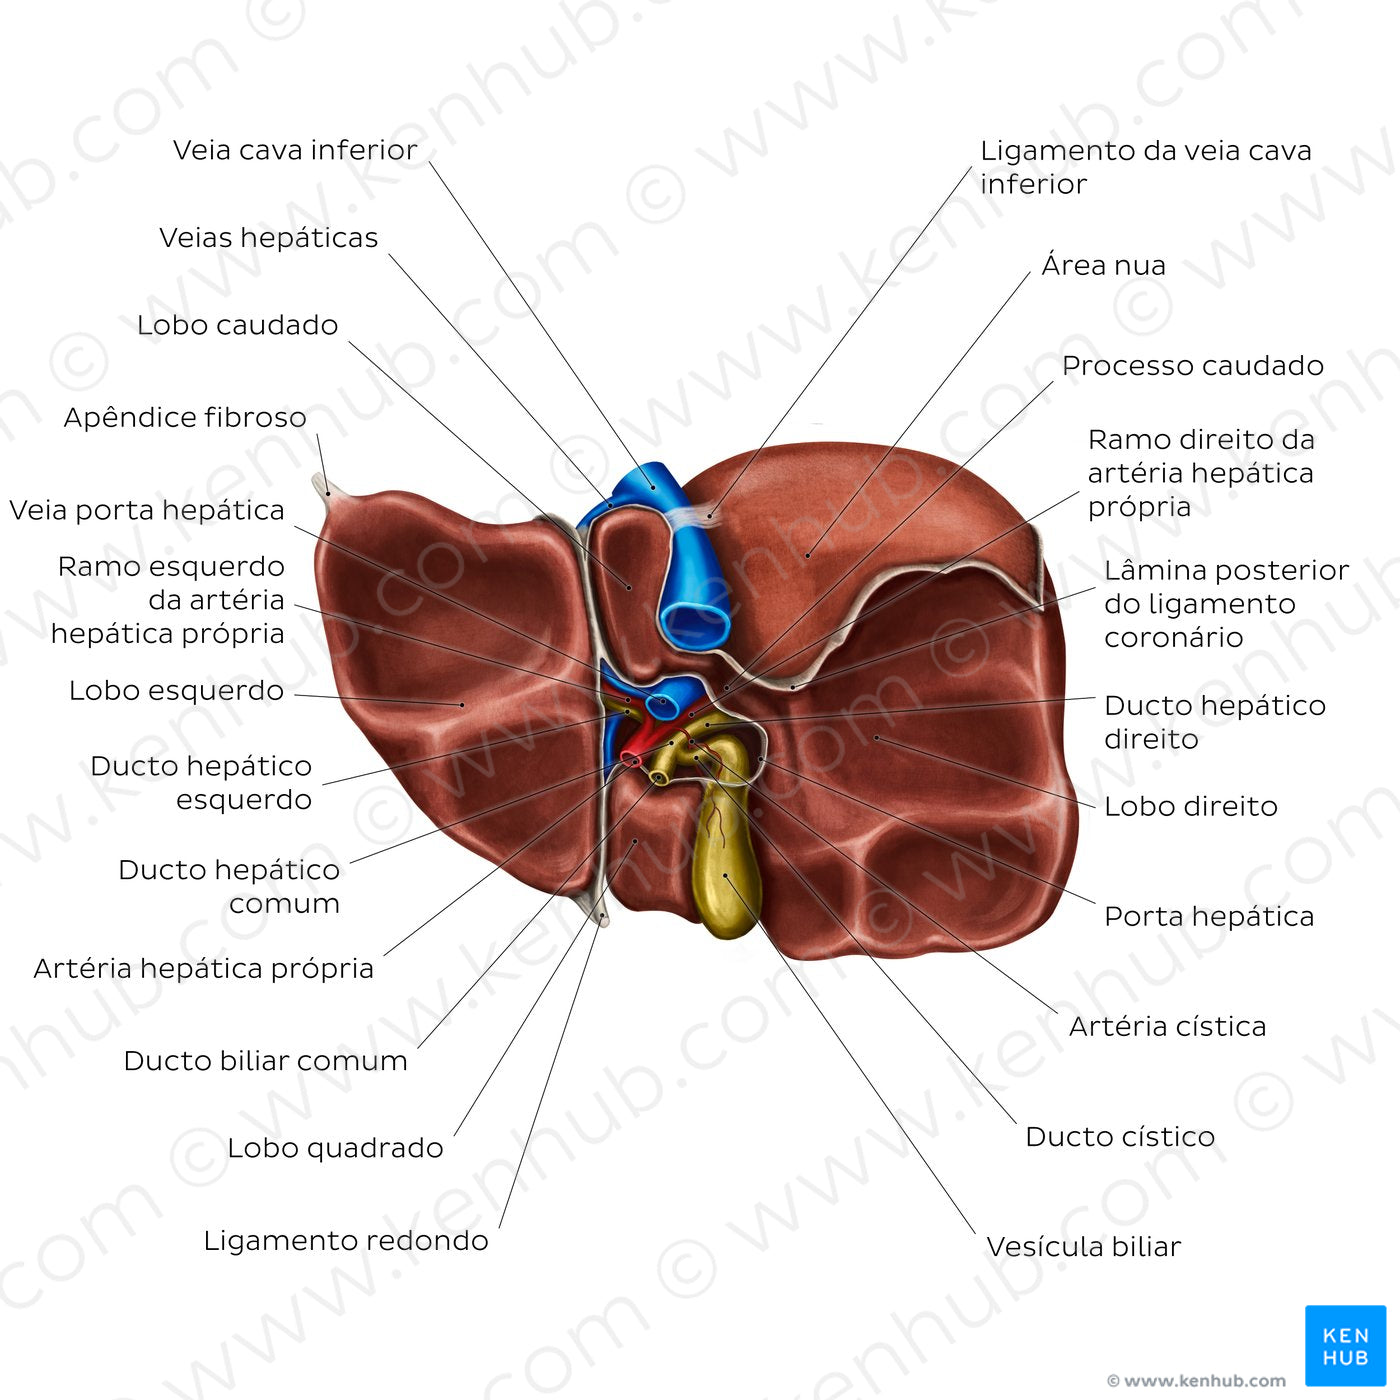 Inferior view of the liver (Portuguese)